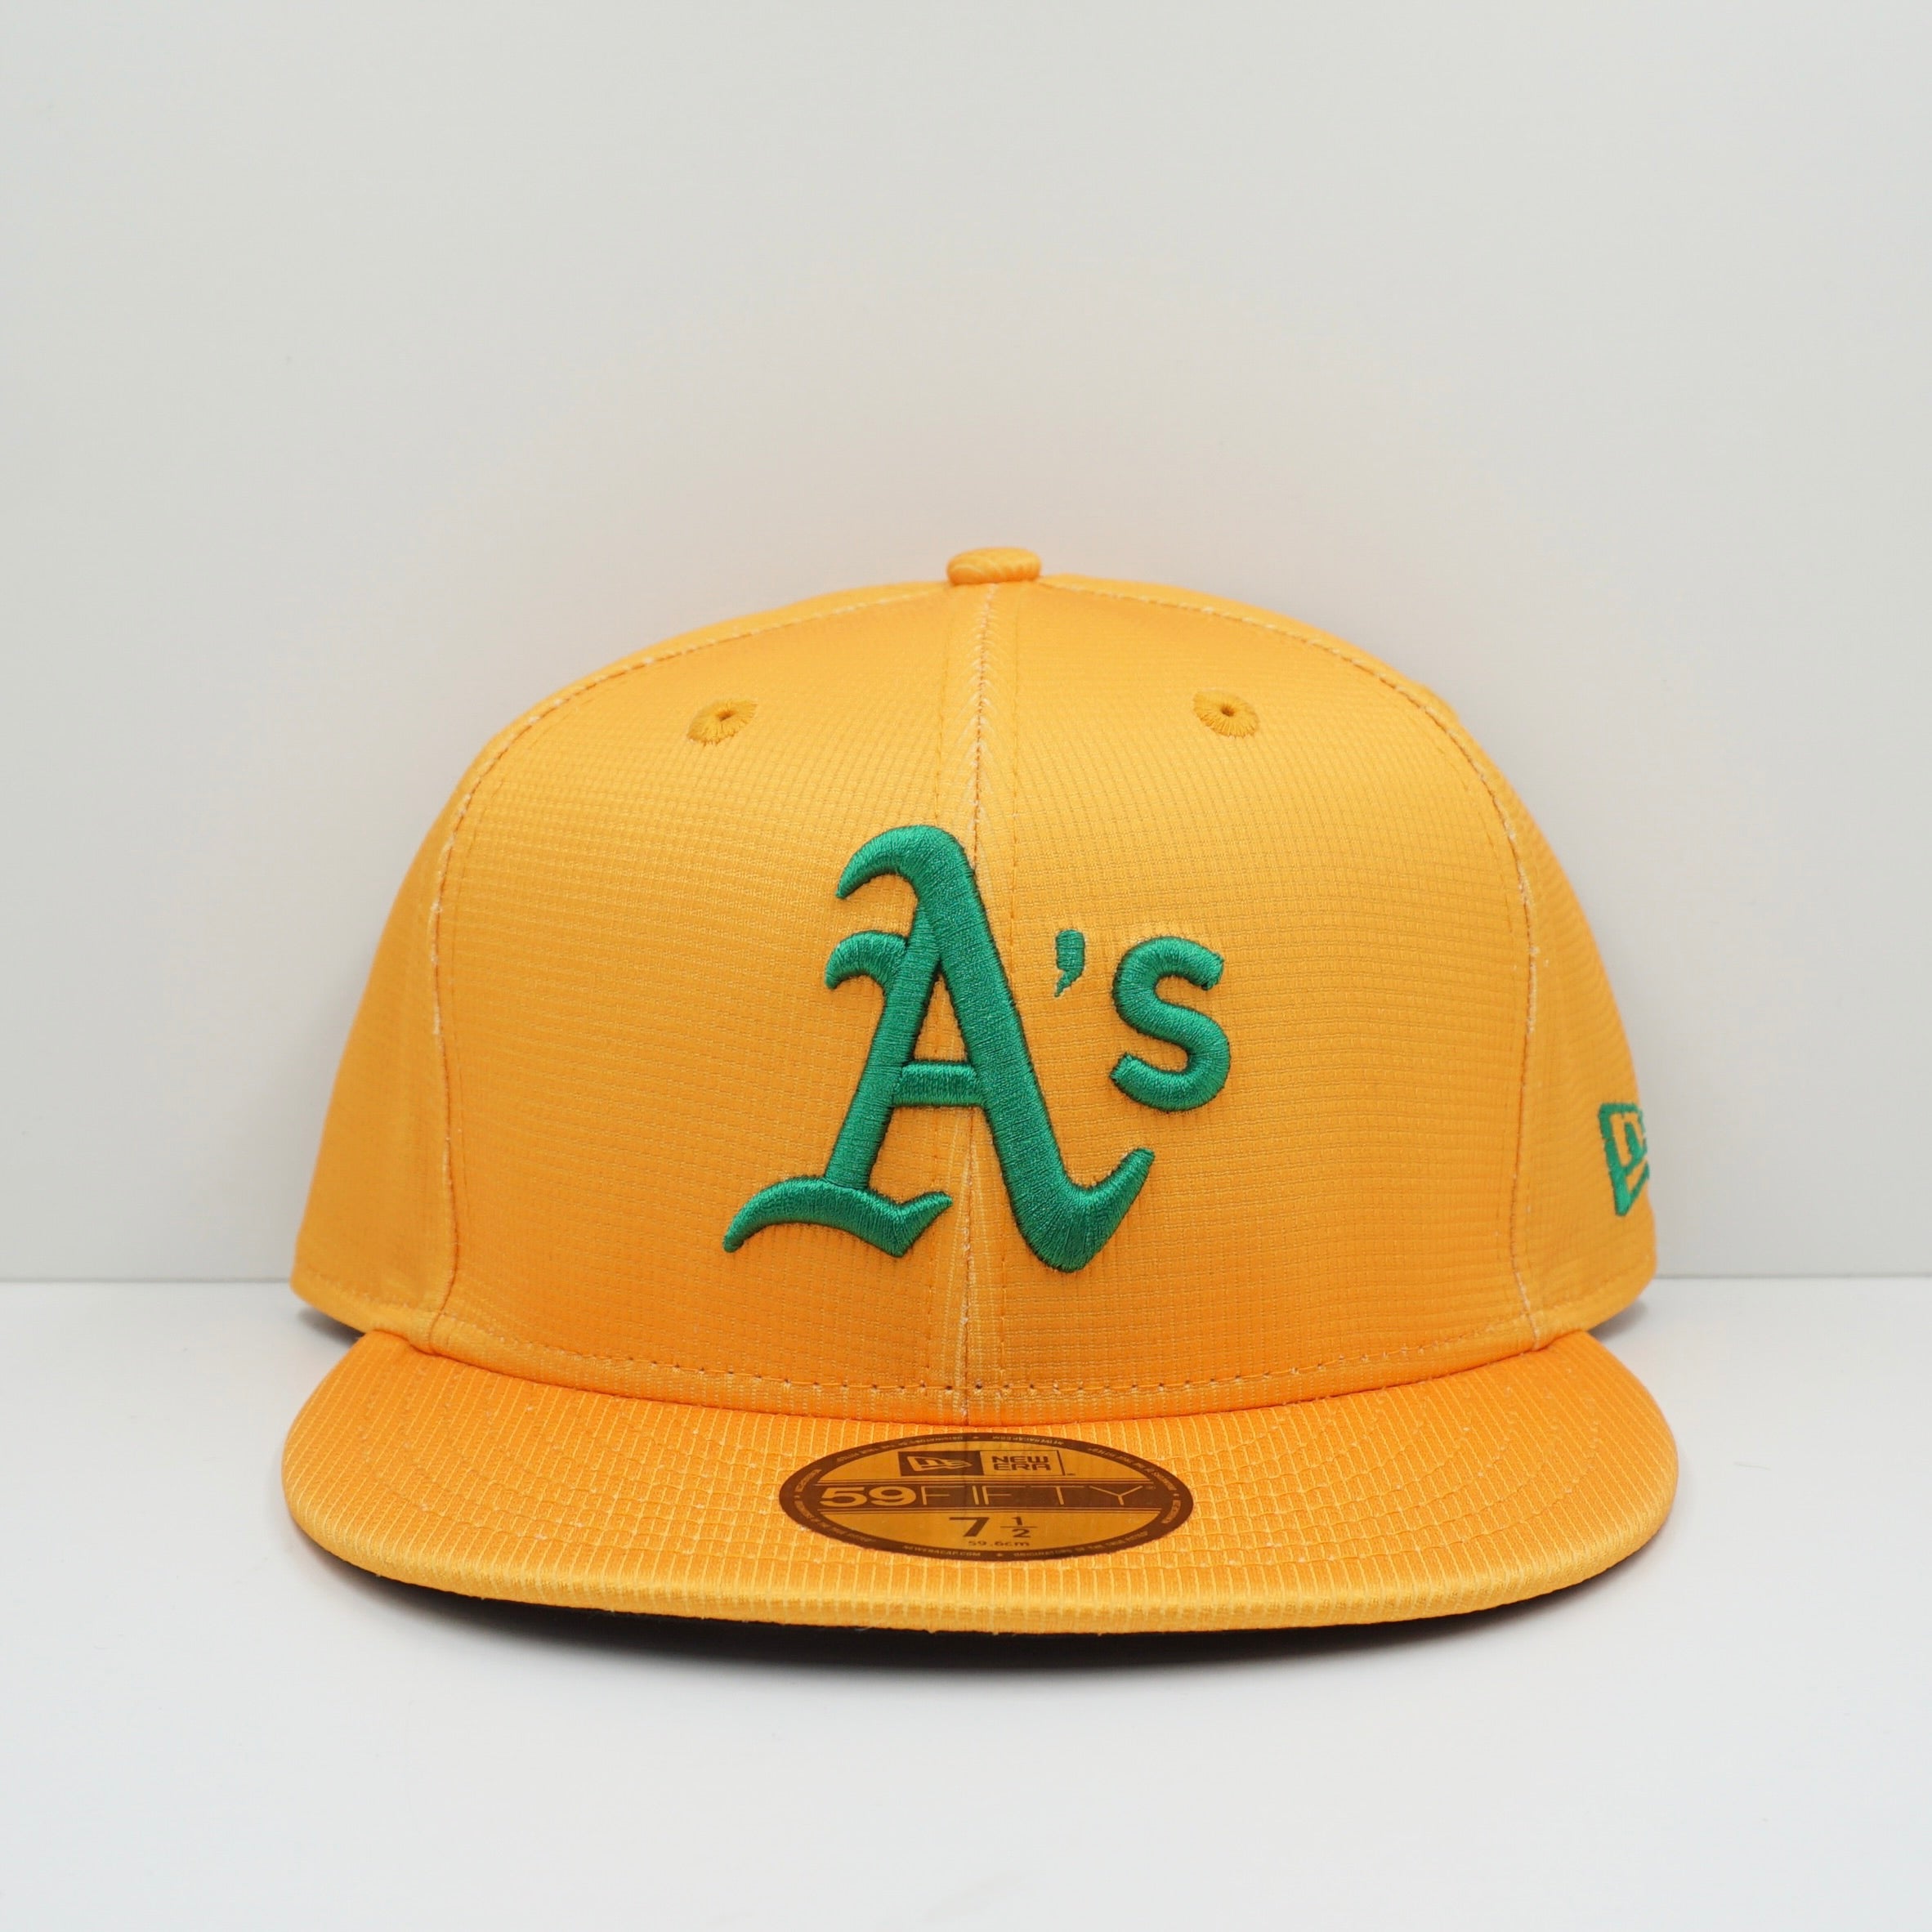 New Era Spring Training Oakland A's Fitted Cap